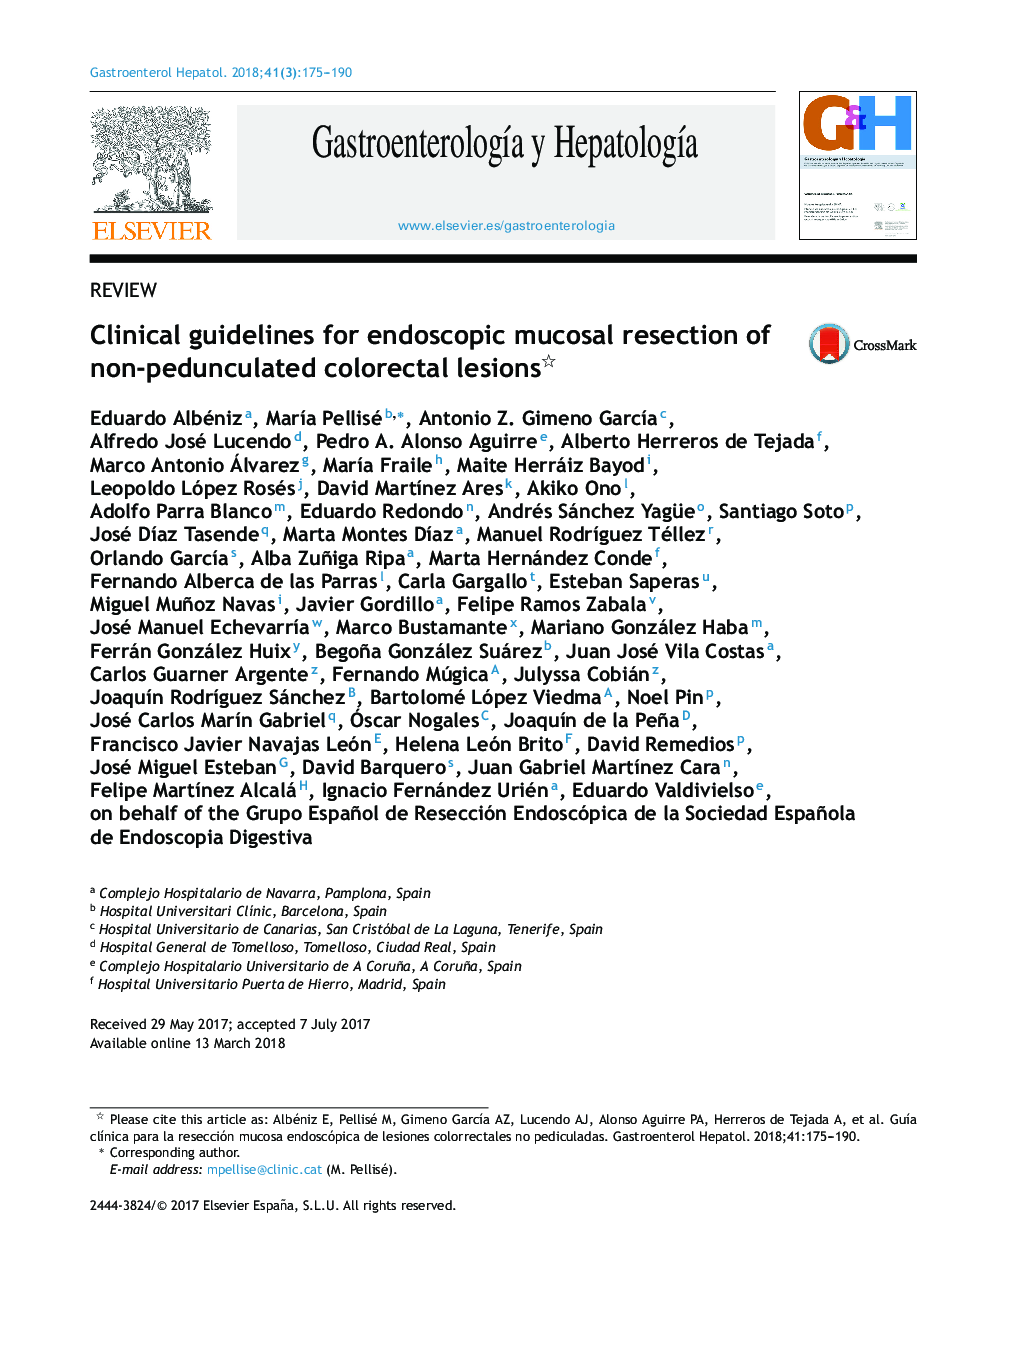 Clinical guidelines for endoscopic mucosal resection of non-pedunculated colorectal lesions